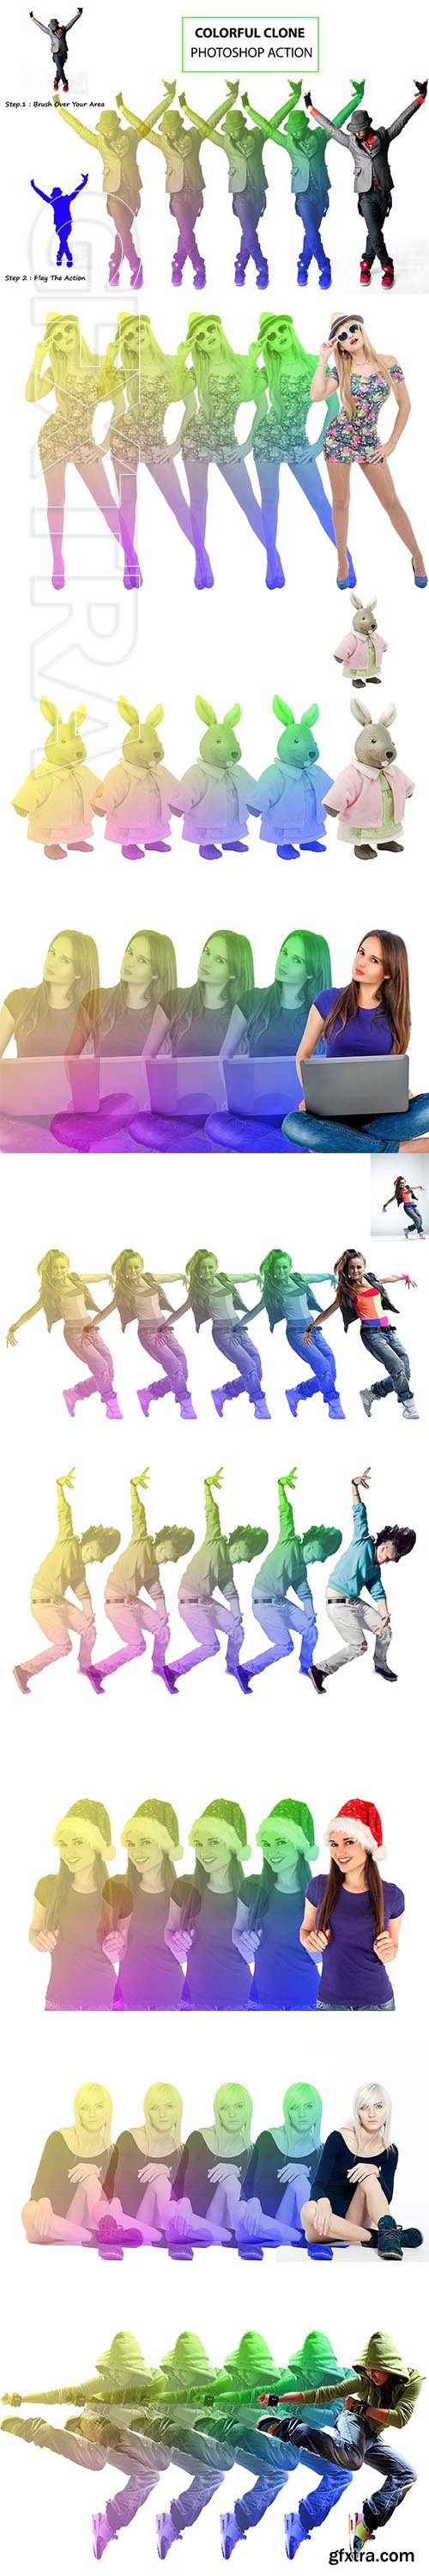 CreativeMarket - Colorful Clone Photoshop Action 3163427